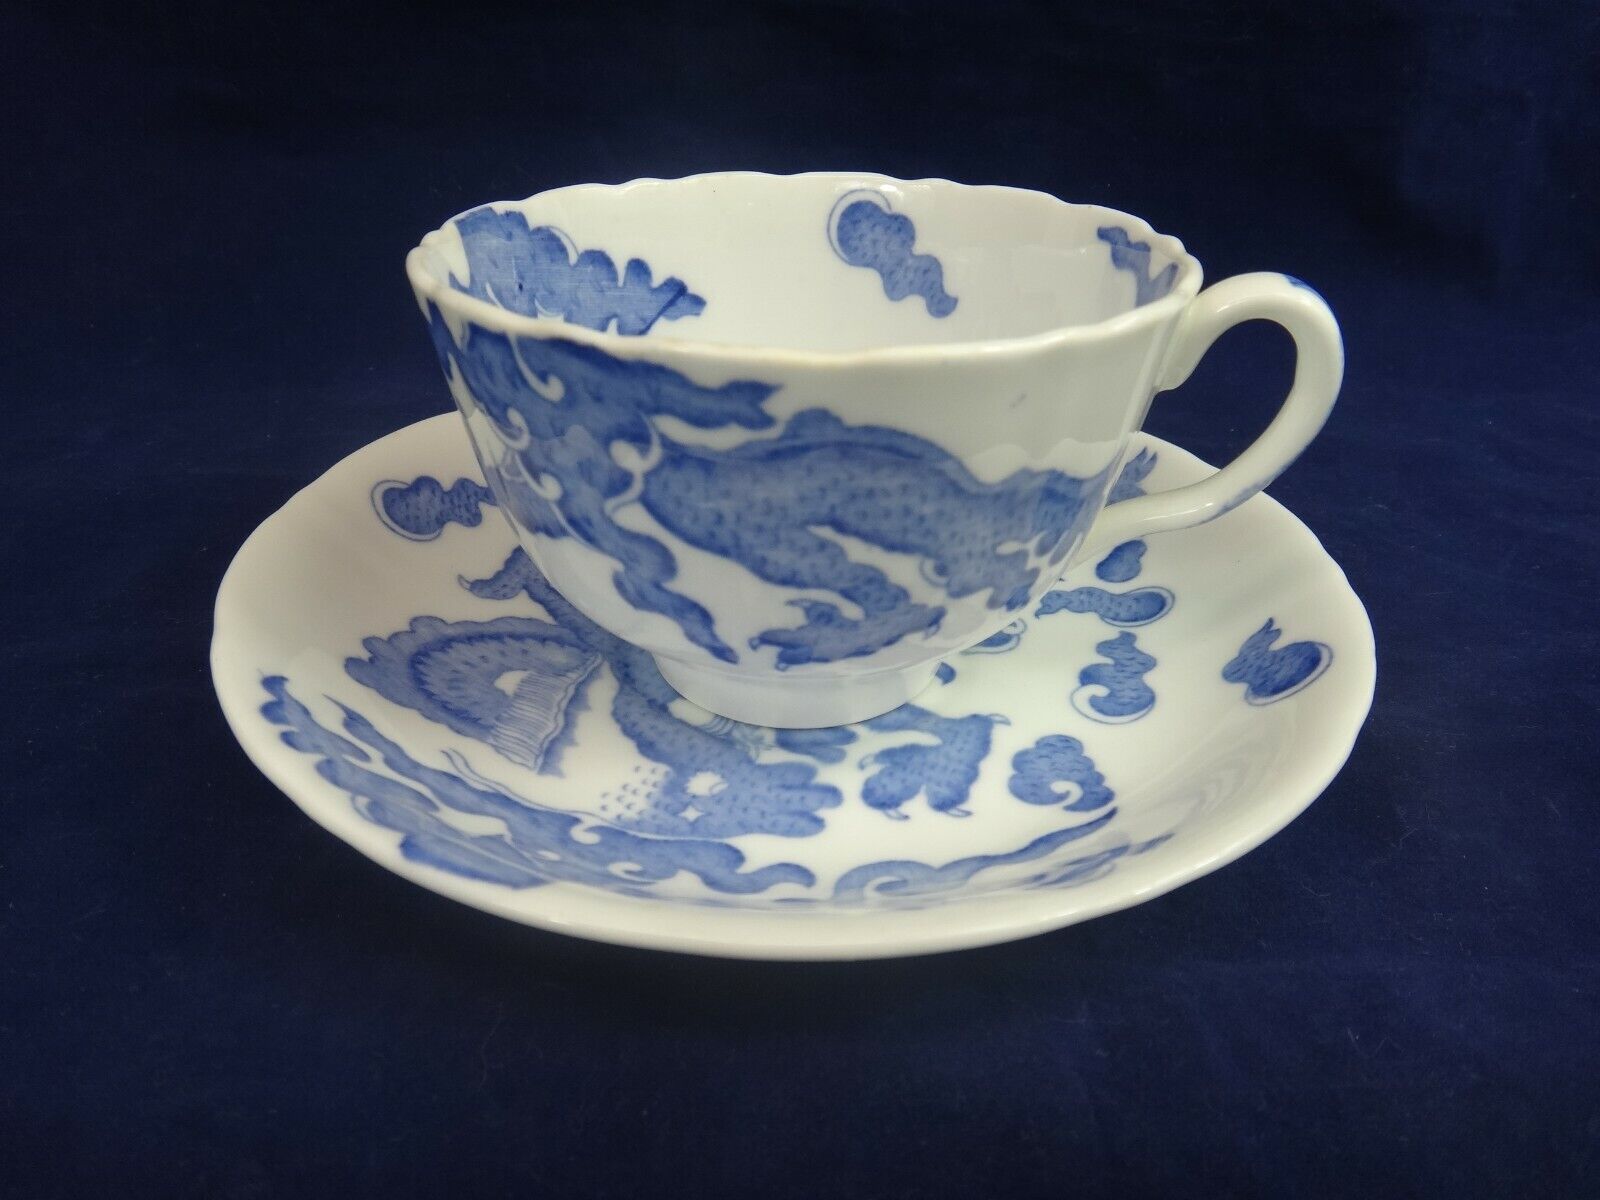 ANTIQUE  E. HUGHES FENTON PALADIN CUP AND SAUCER ~BLUE DRAGONS ~HARD TO FIND